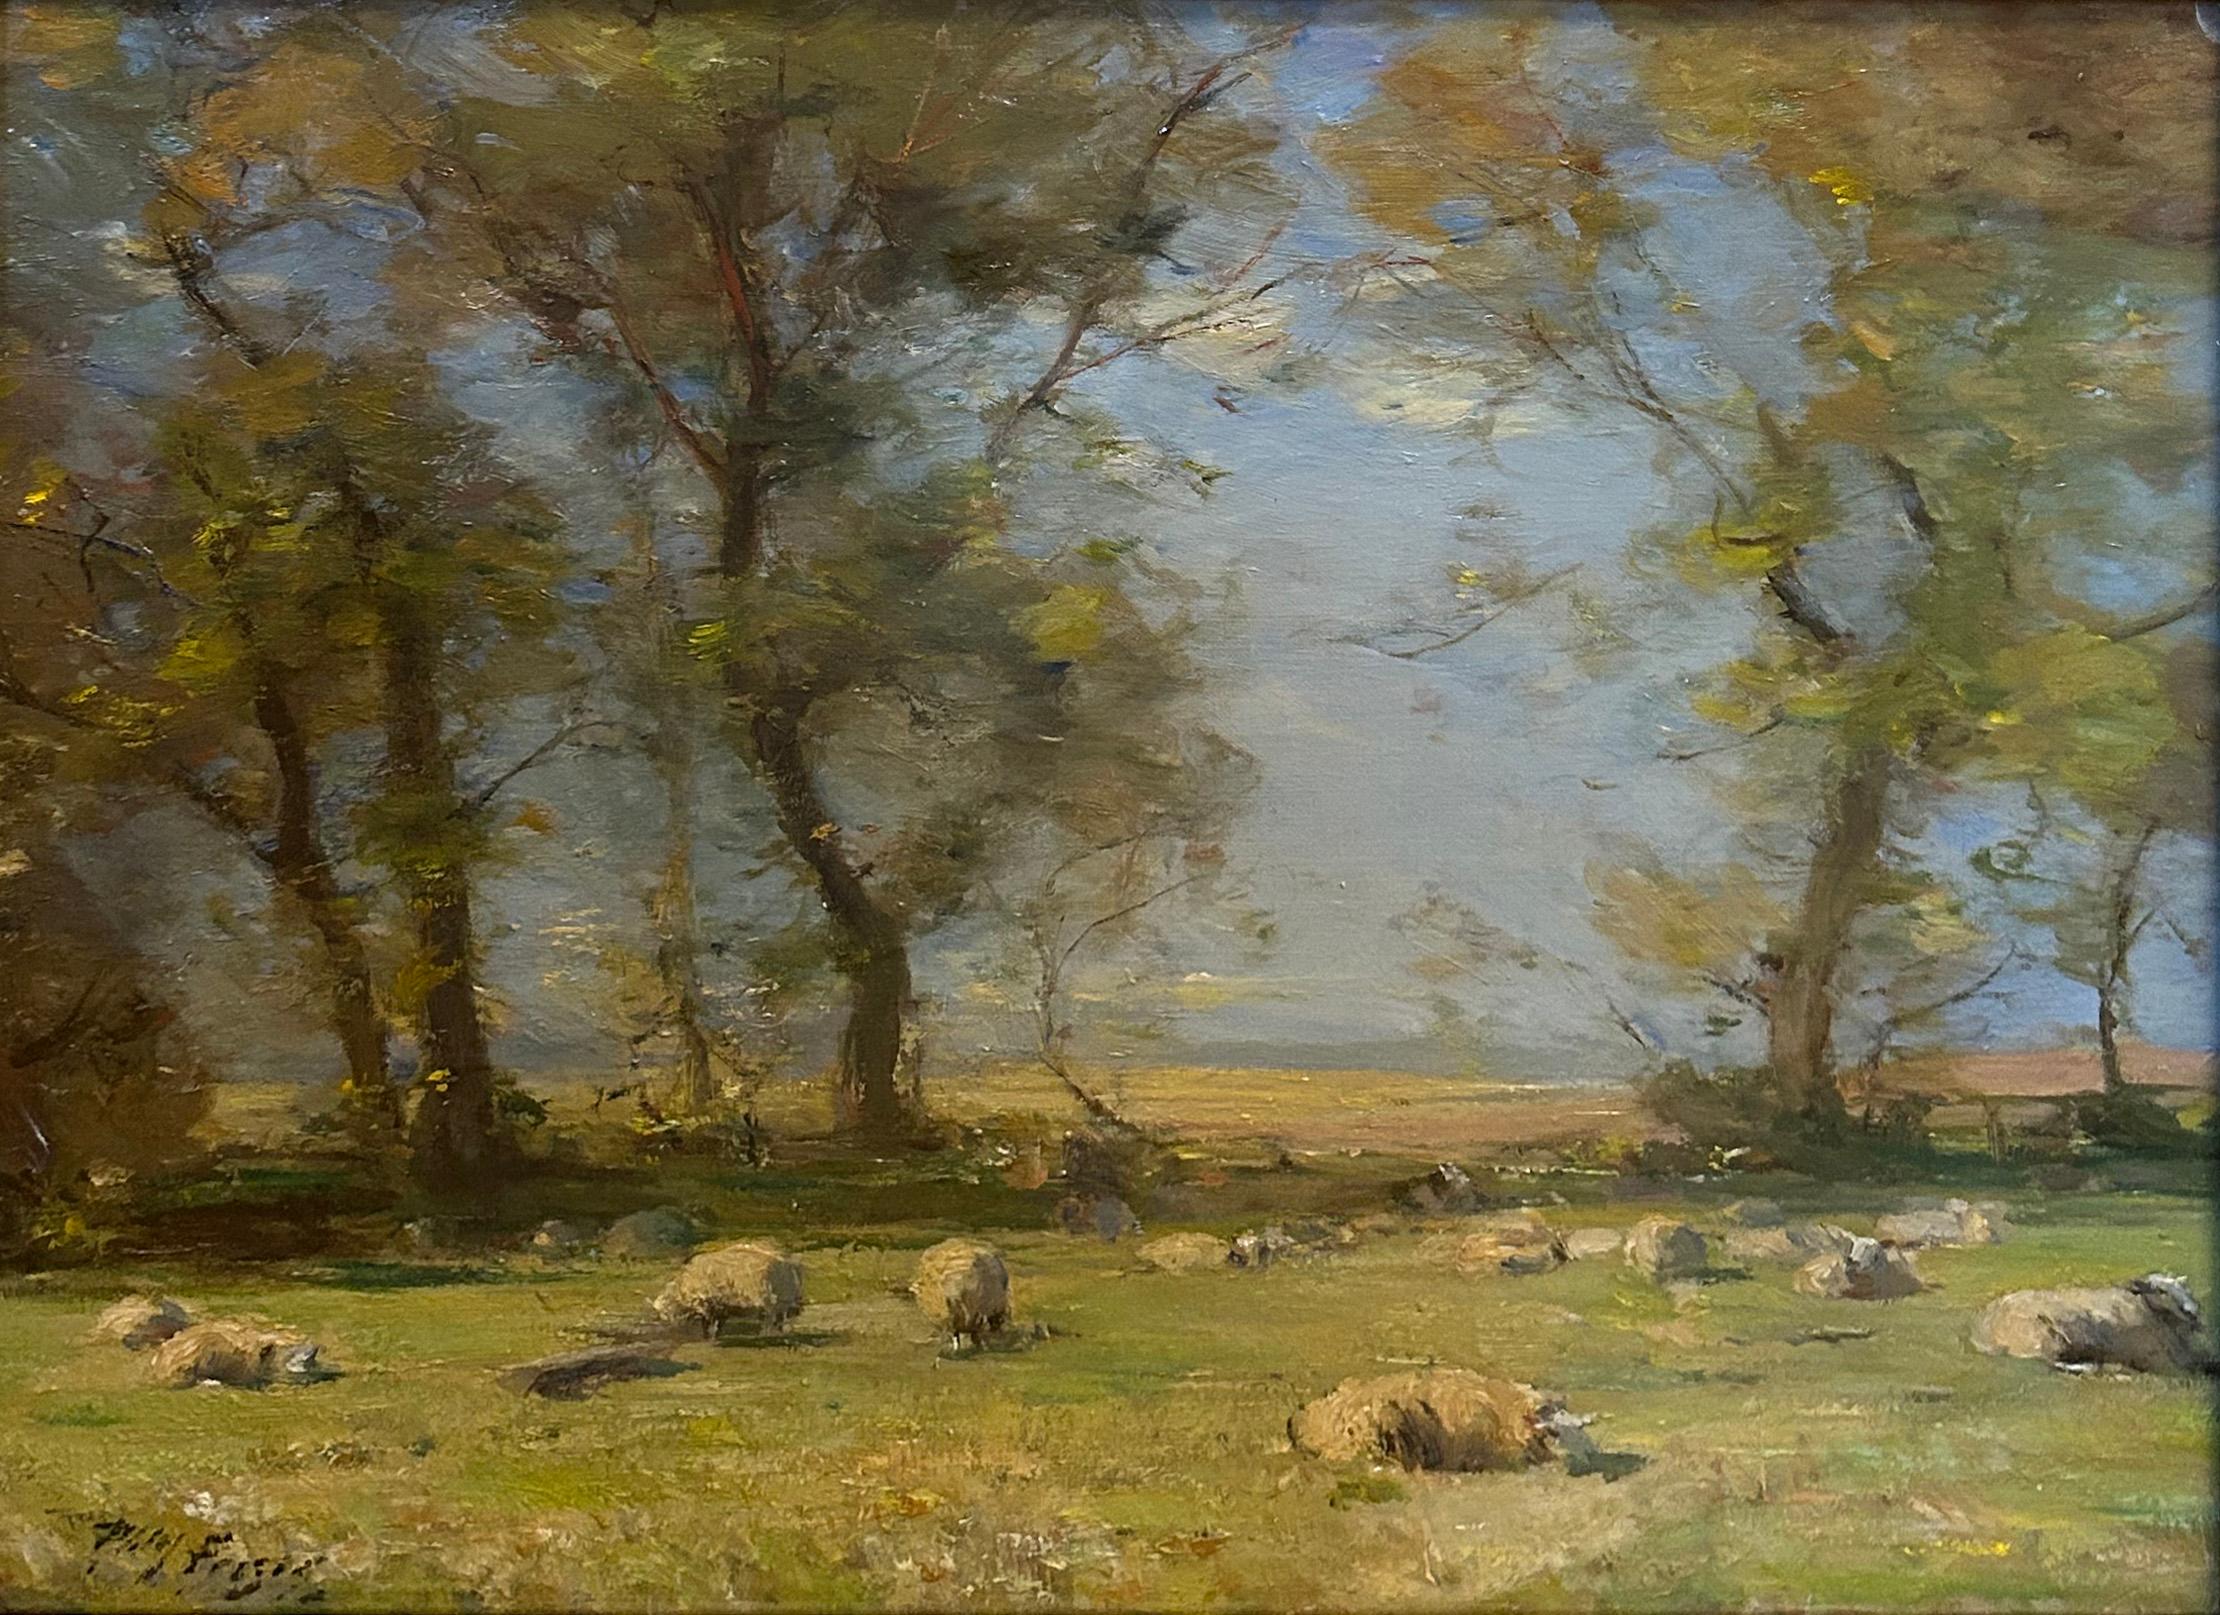 A Summer's Day, impressionist, early 20th century, oil on canvas - Impressionist Painting by William Miller Frazer